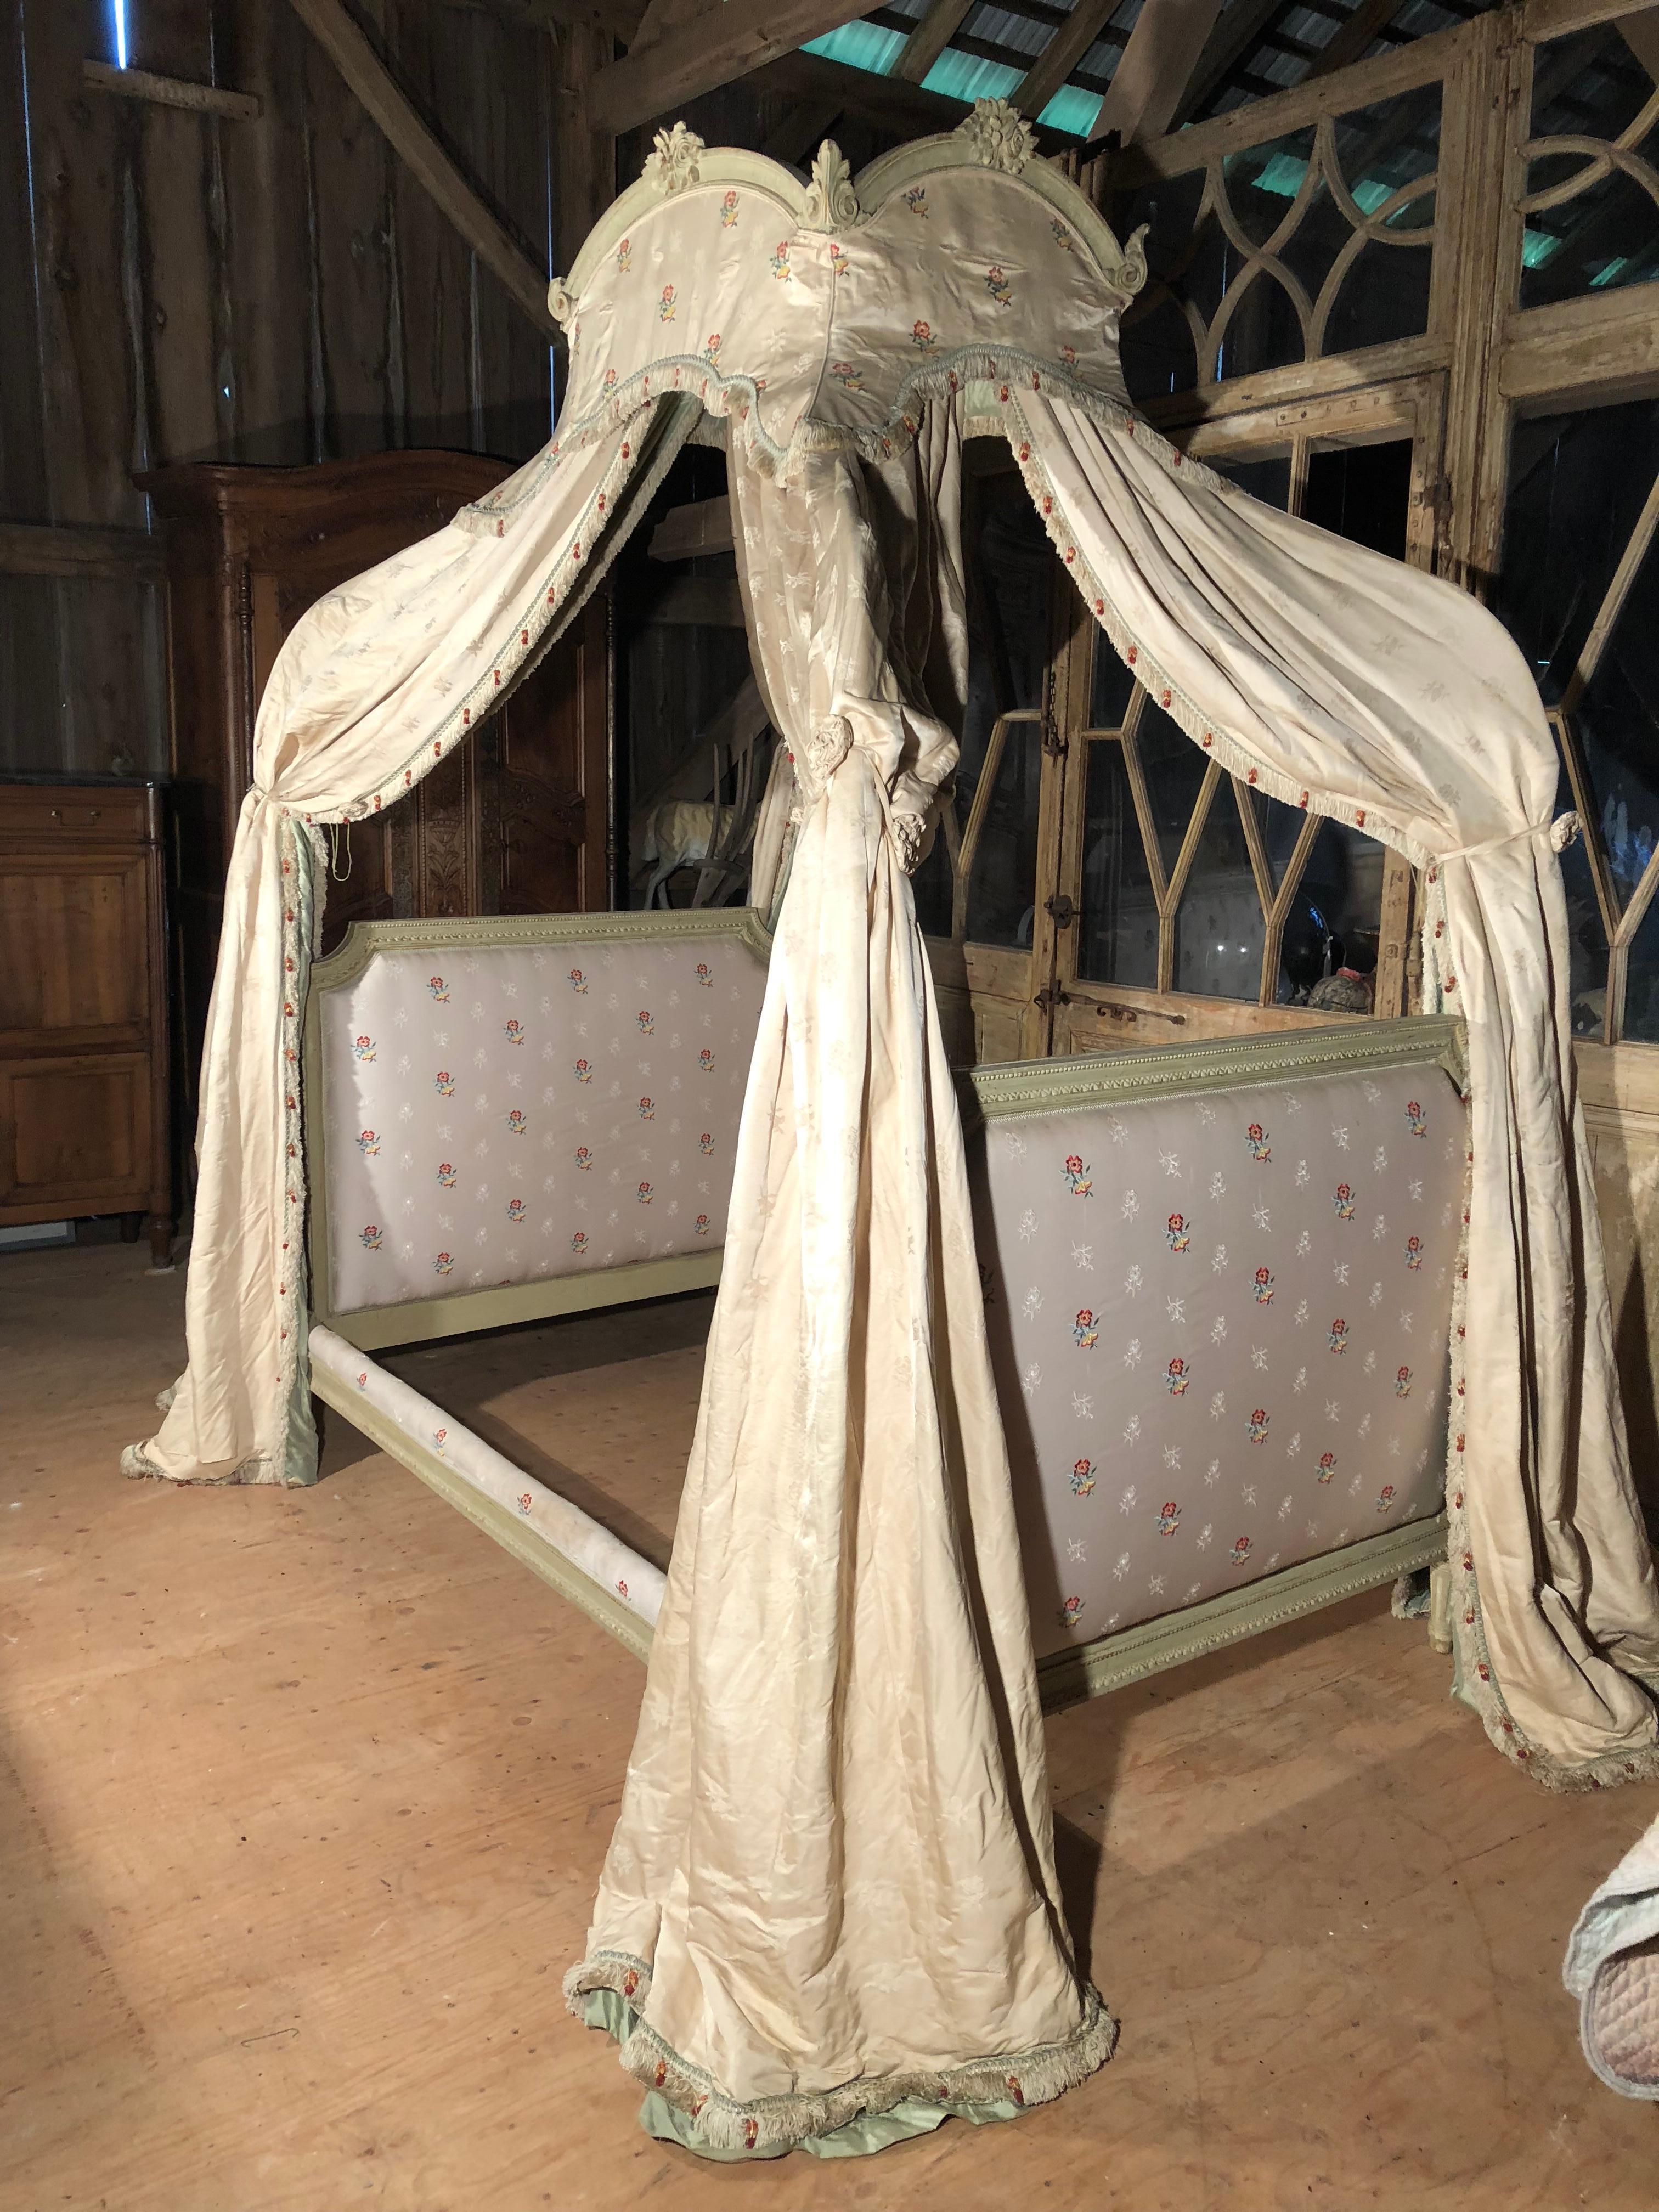 A “Lit a Polonaise” canopy bed with old silk draperies, late 19th century French, in the Louis XVI style, with a can bed and green painted beech frame, iron canopy supports.
The mattress size is an extra large full (54x 80). Mattress not